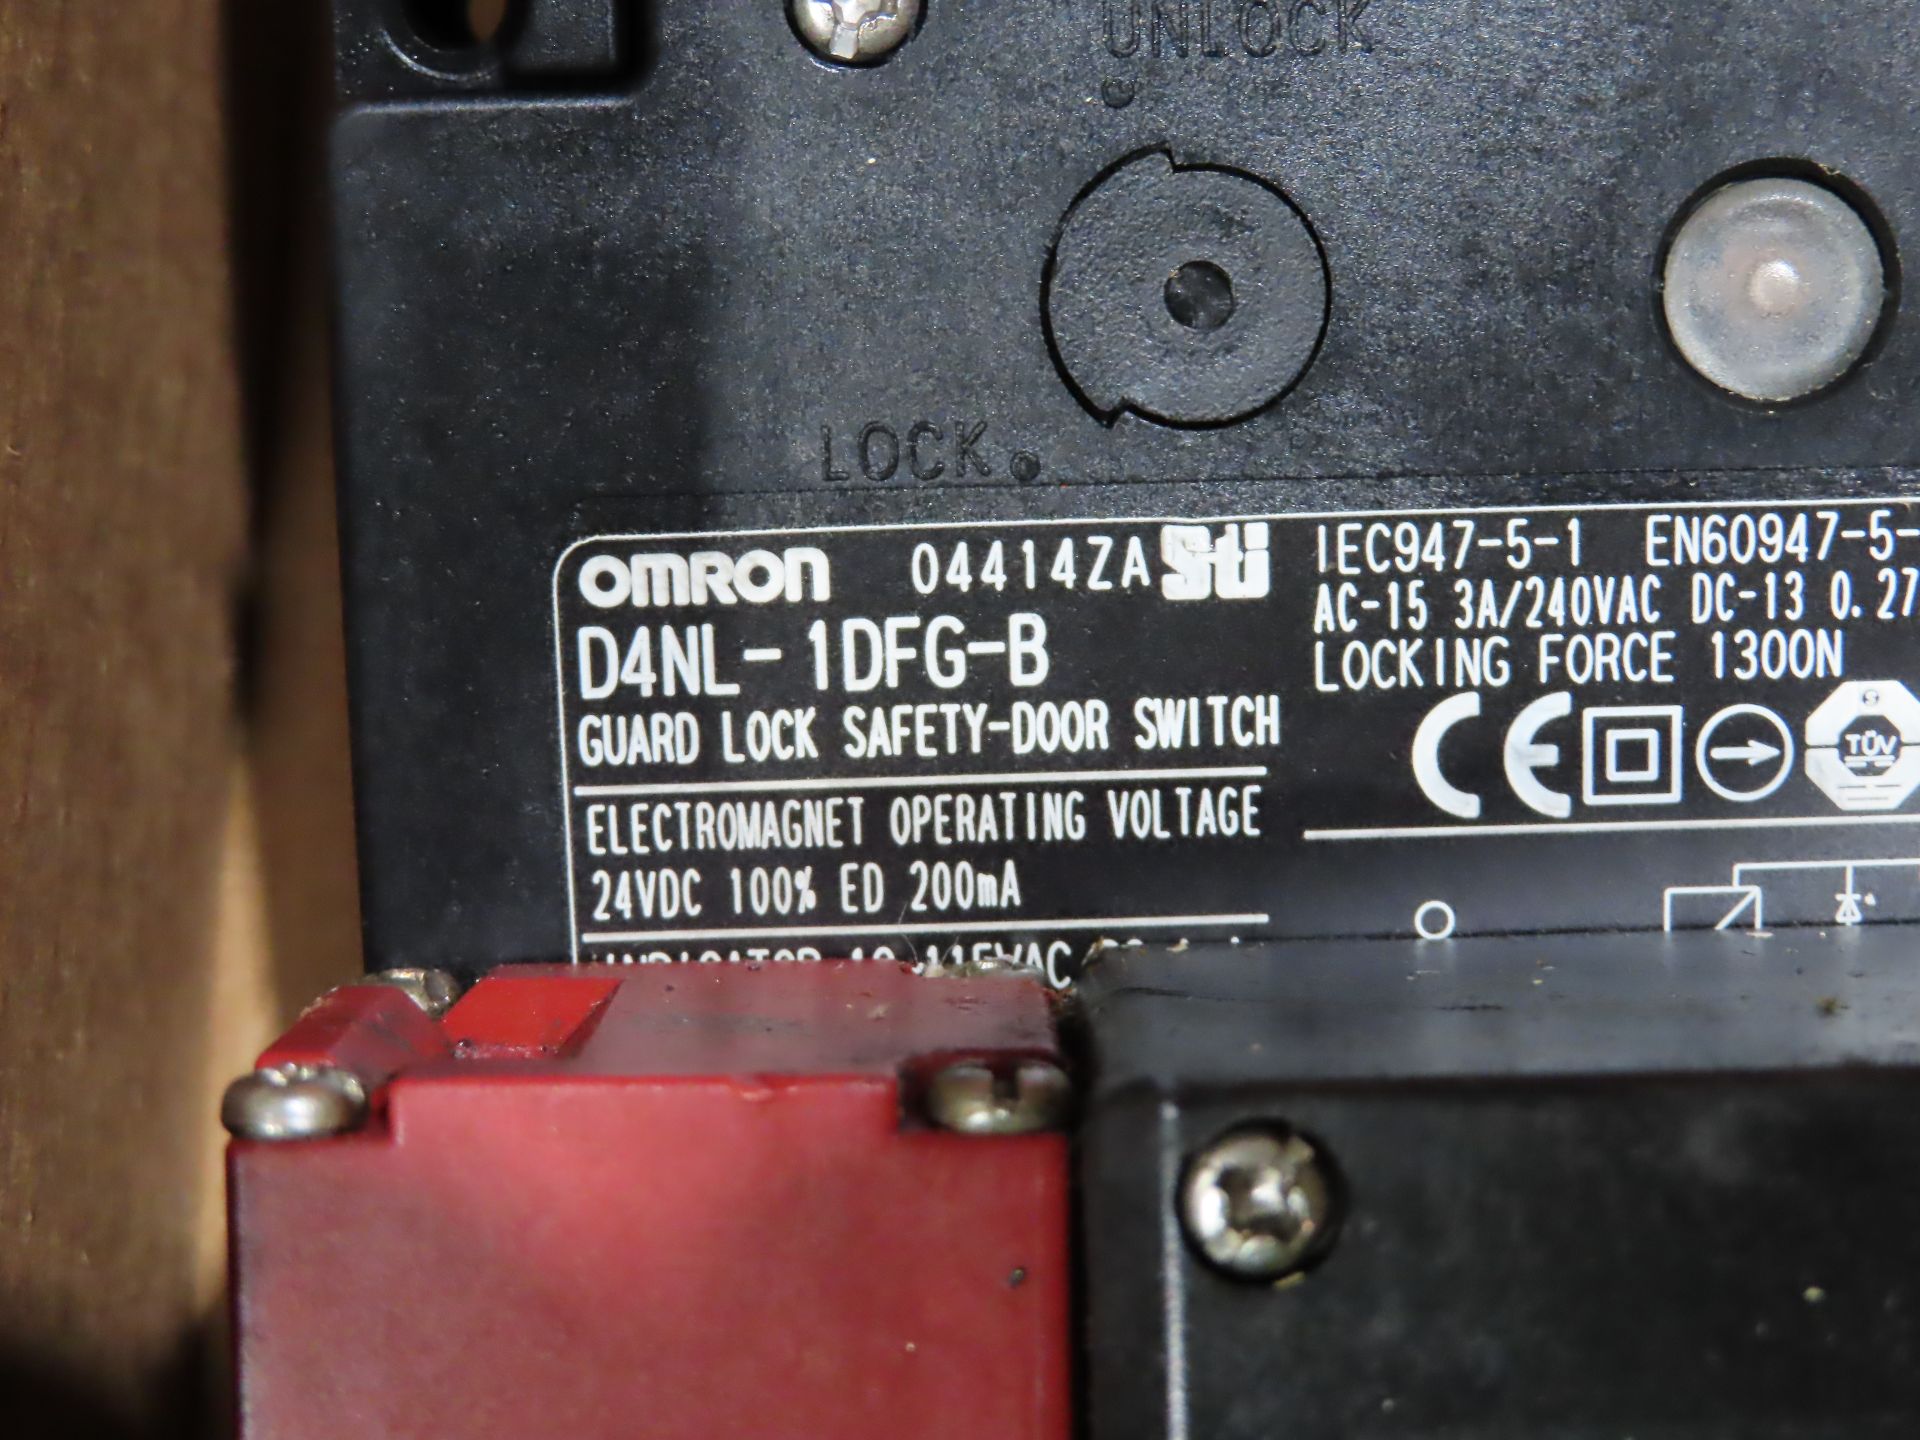 Qty 3 Omron model D4NL-1DFG-B, used, as always with Brolyn LLC auctions, all lots can be picked up - Image 2 of 2